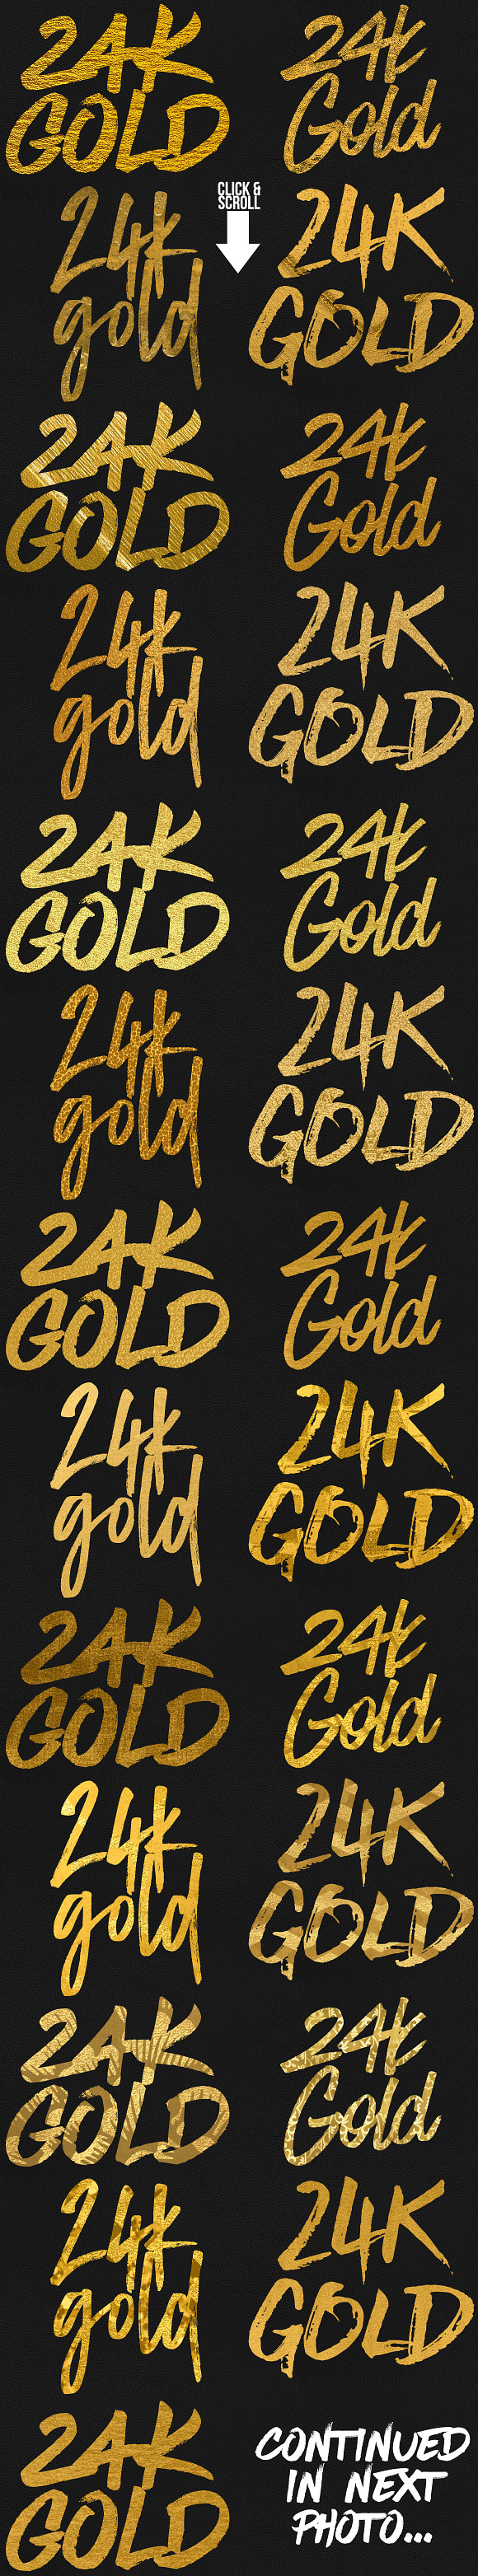 500 Gold Foil Layer Styles Photoshop in Photoshop Layer Styles - product preview 1